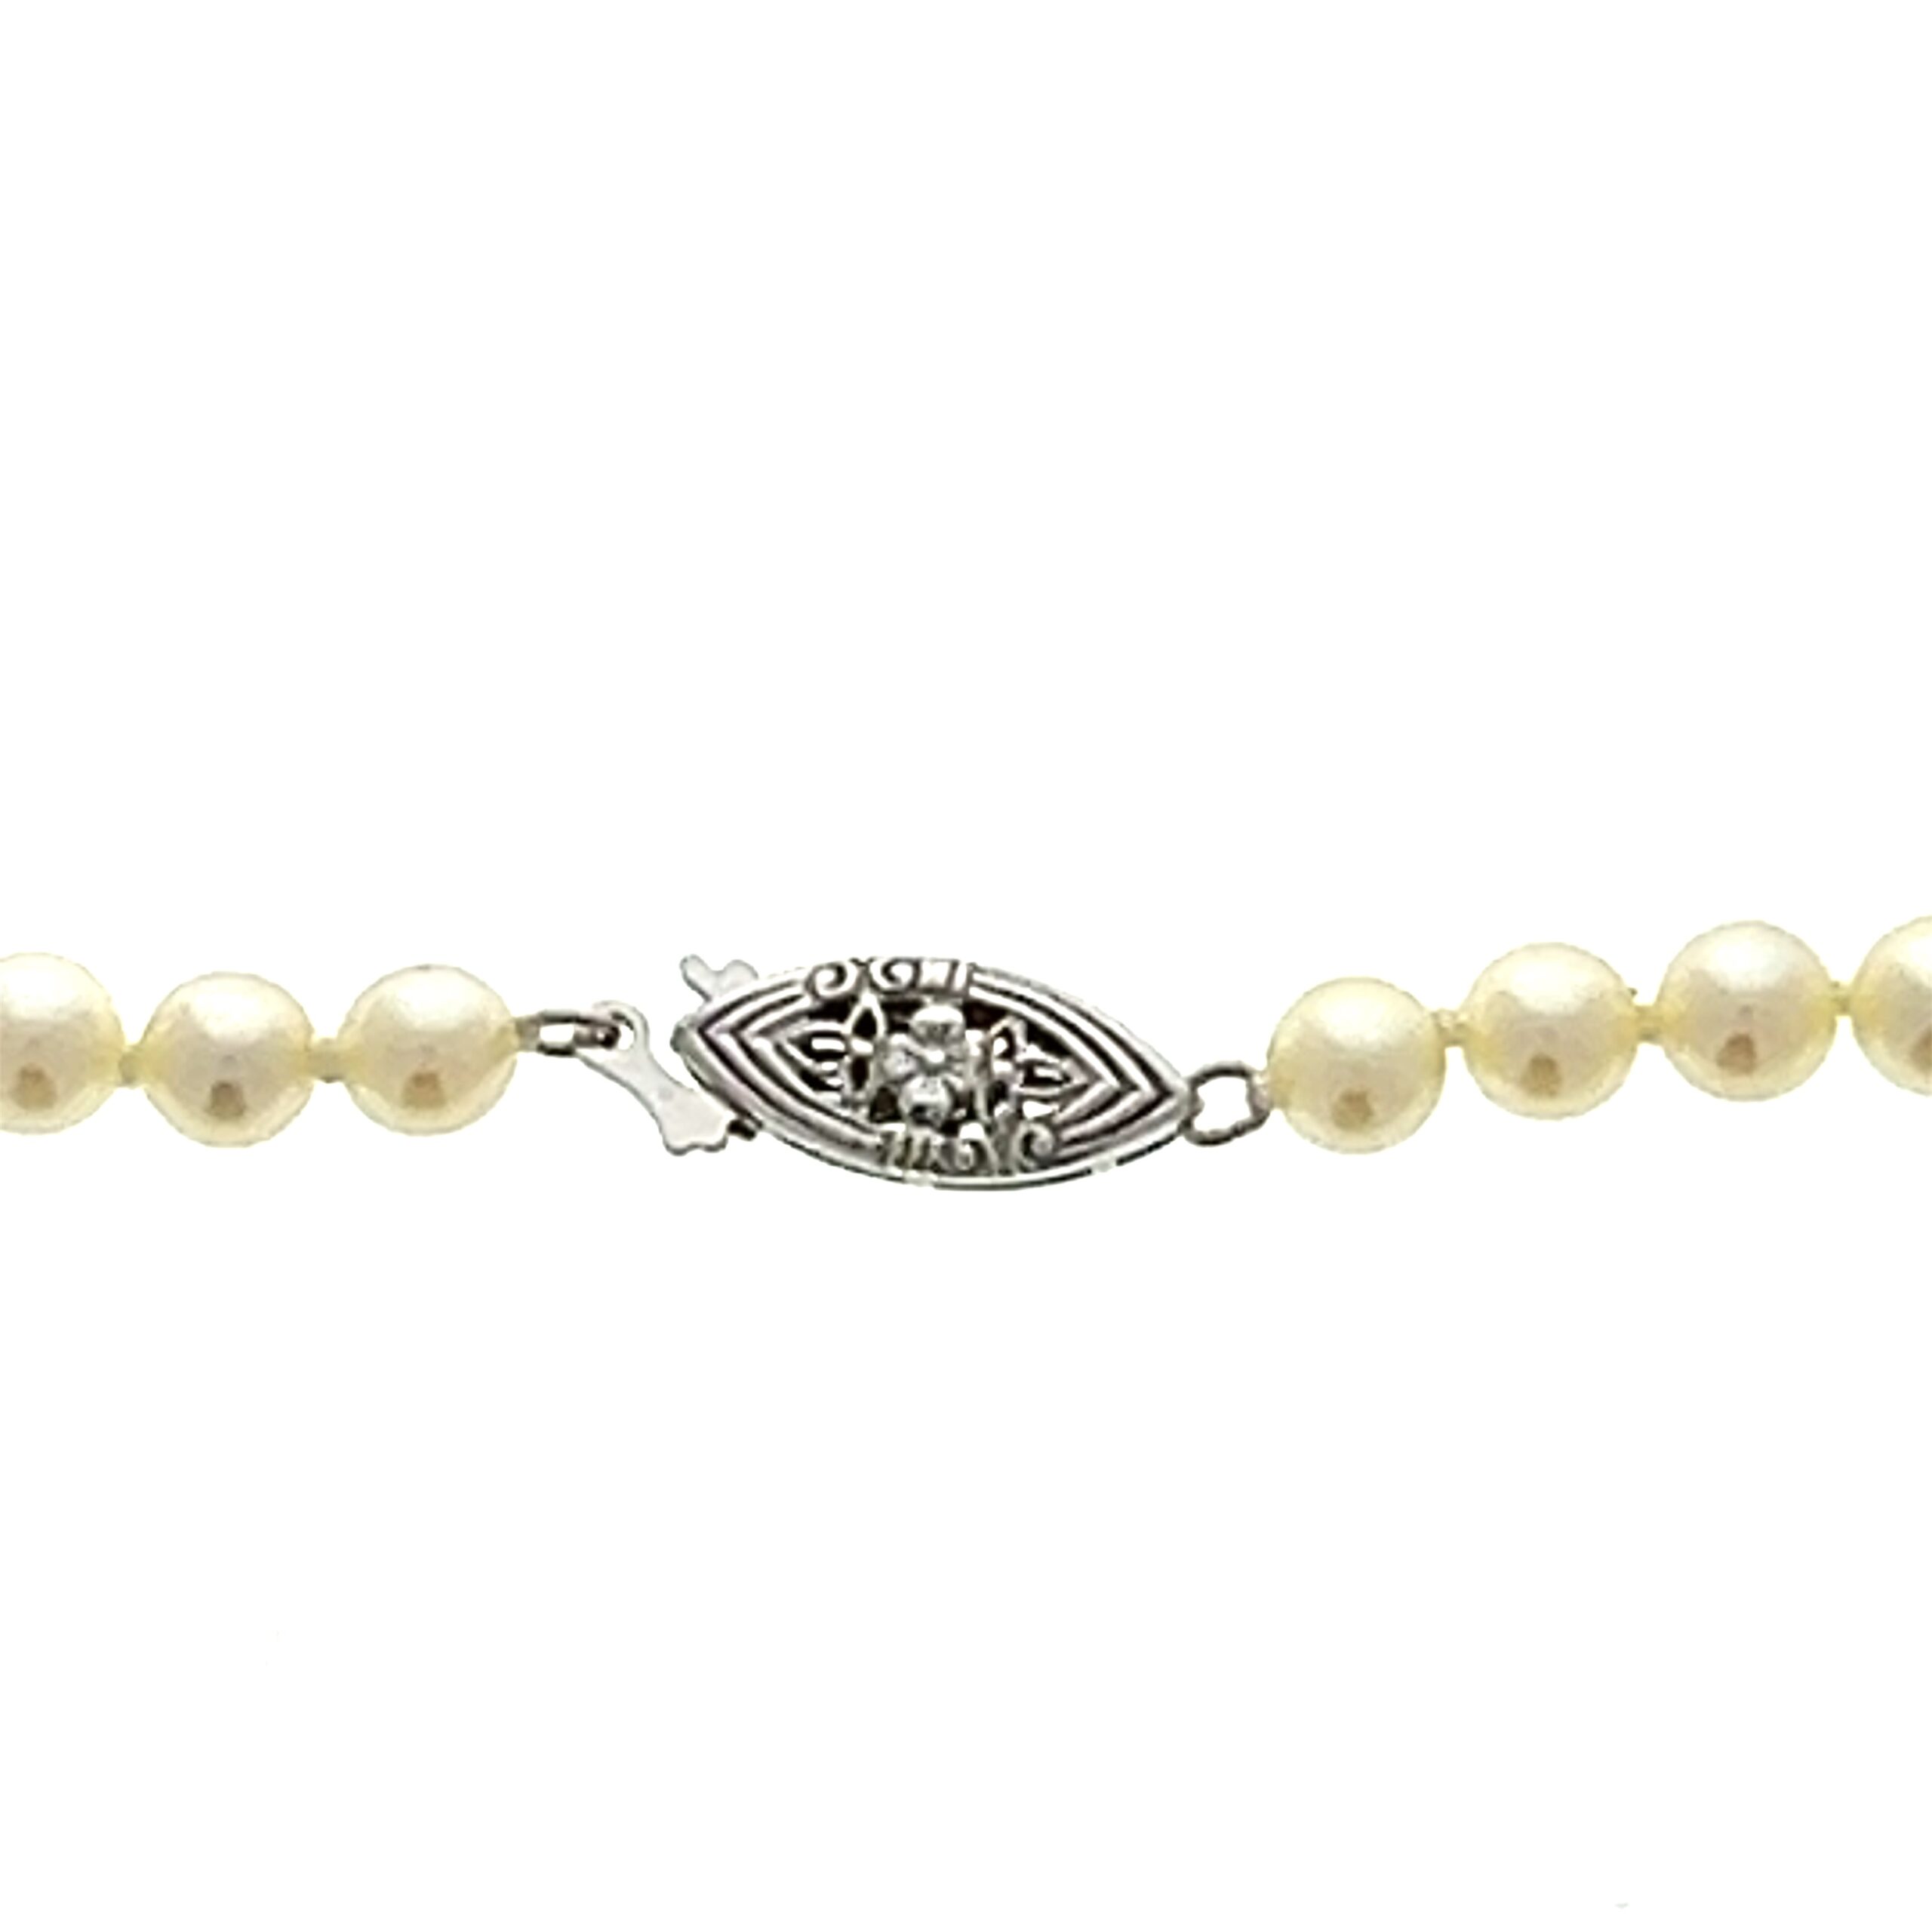 One estate vintage pearl strand necklace featuring cream colored cultured pearls ranging in size 4.5mm to 7.7mm in a graduated design. The necklace measures 17" long and has a 14 karat white gold clasp.